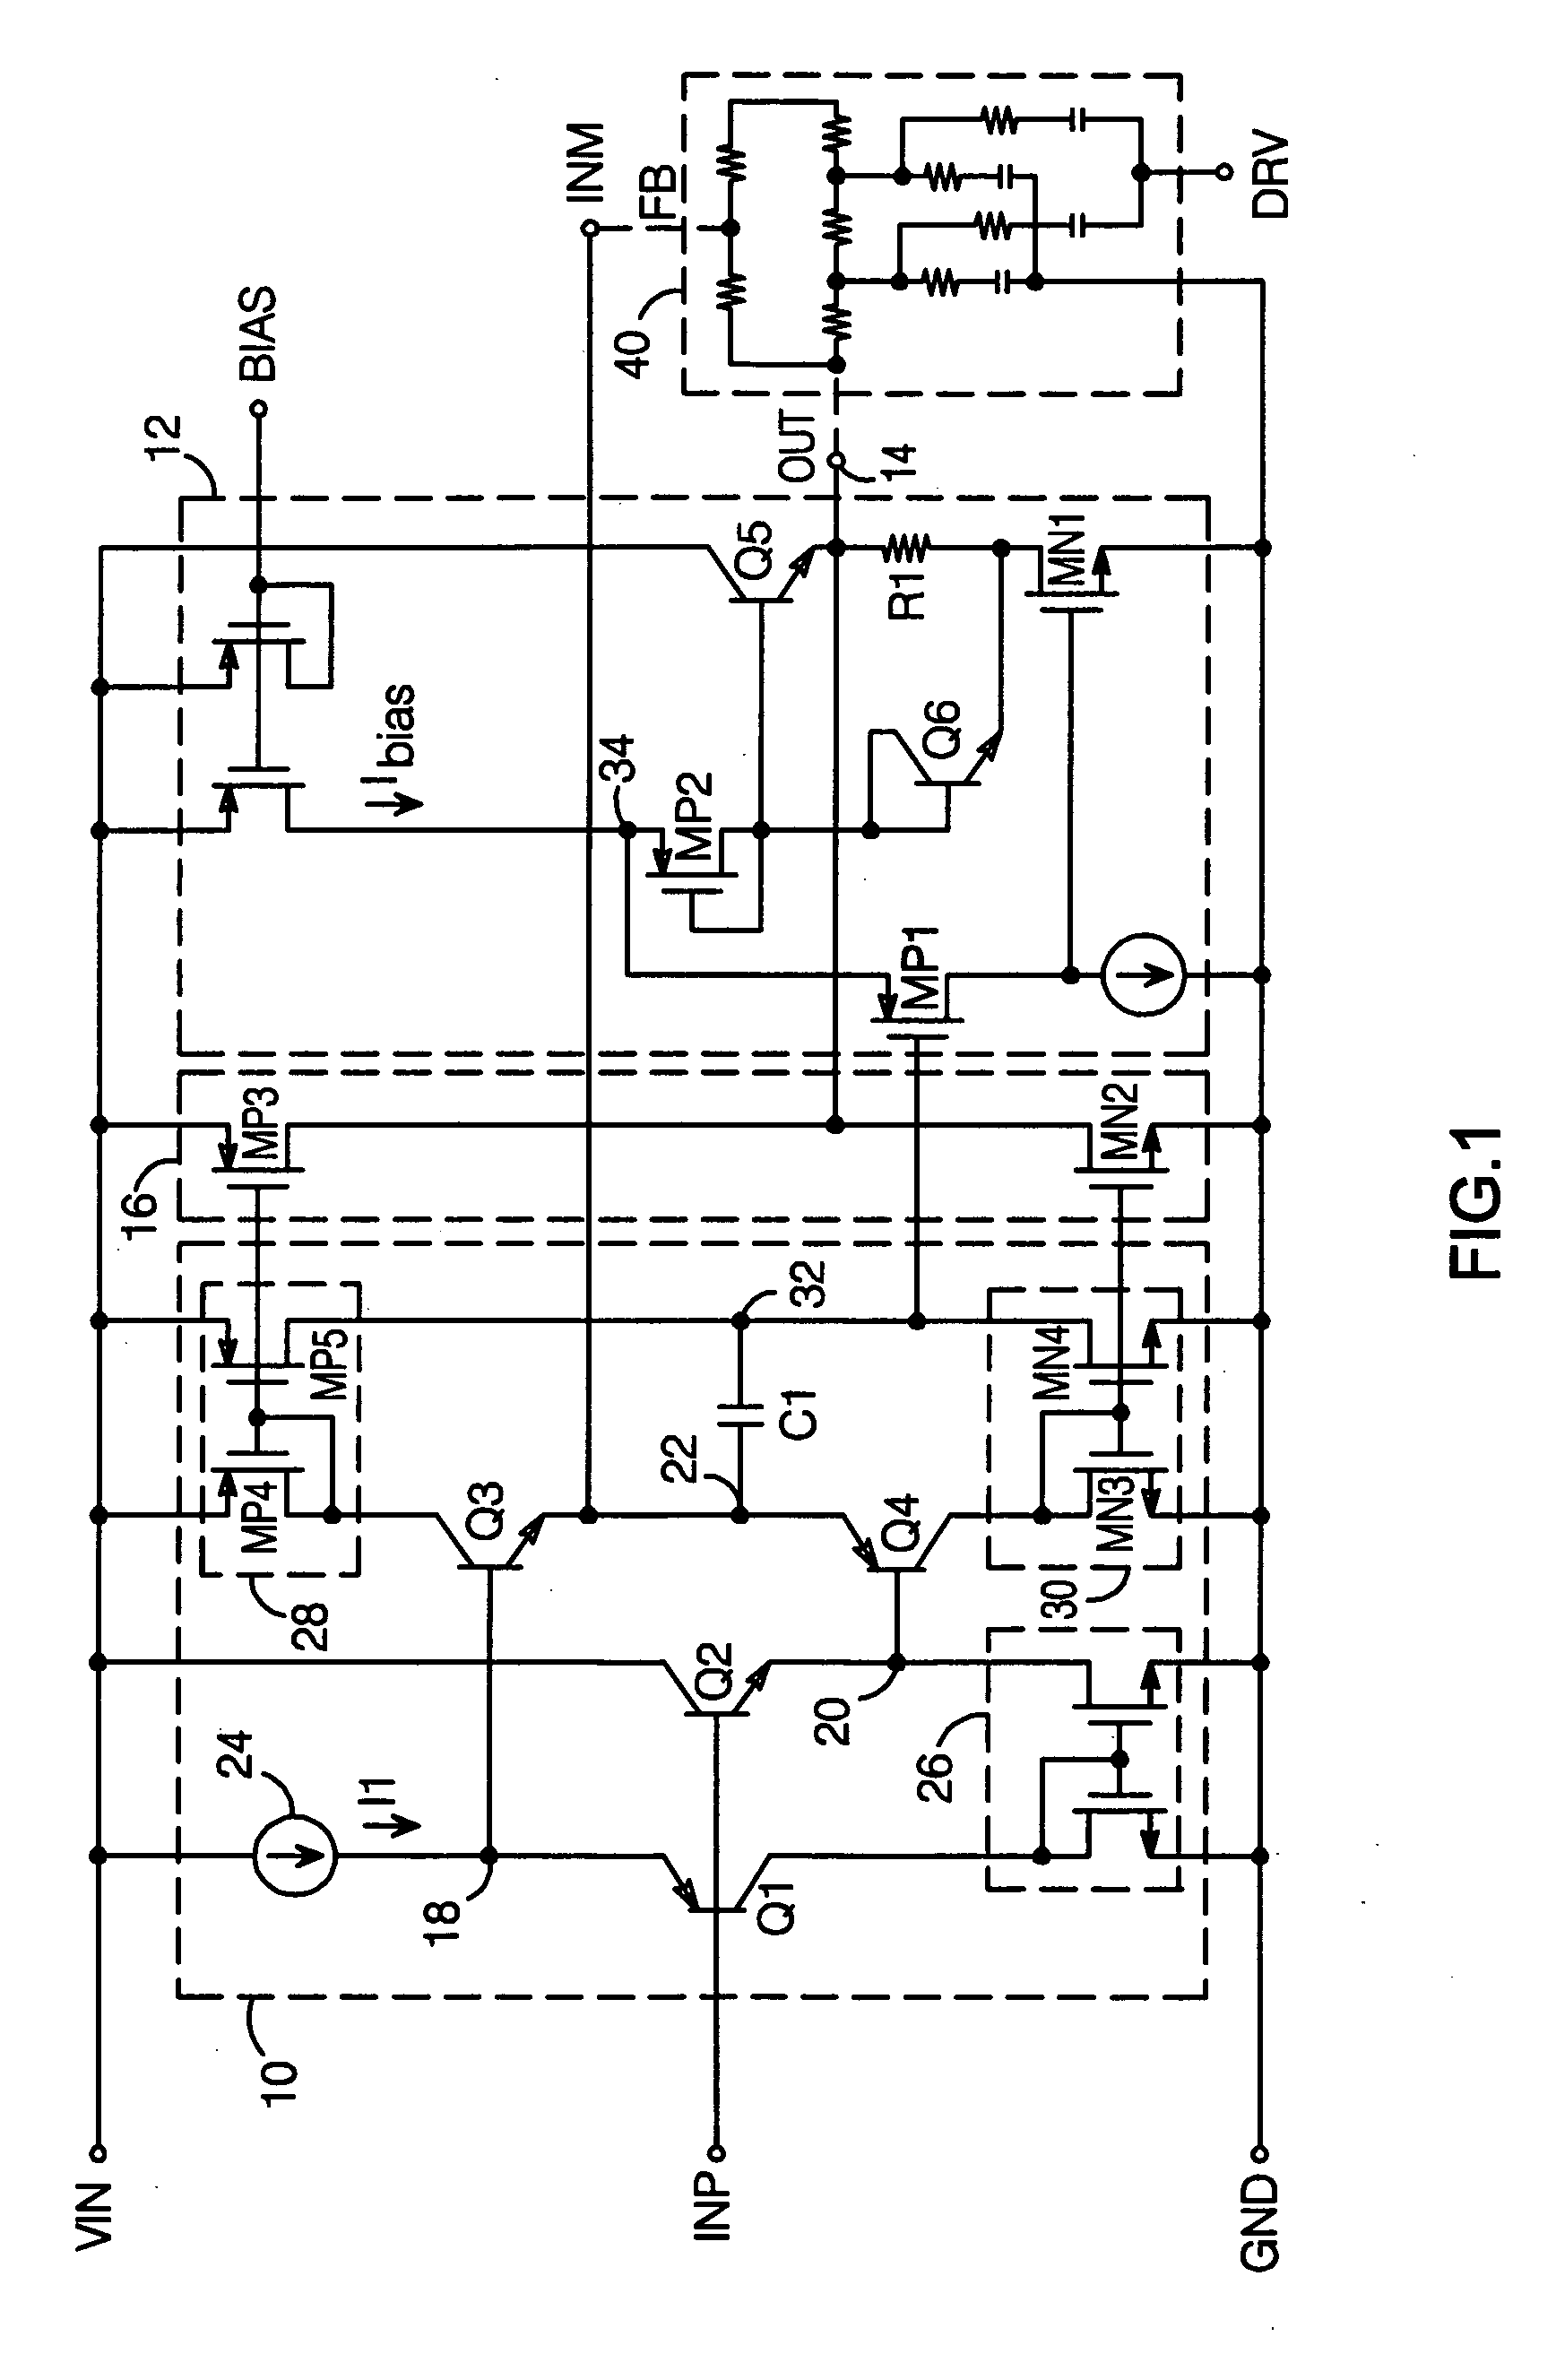 Small signal amplifier with large signal output boost stage